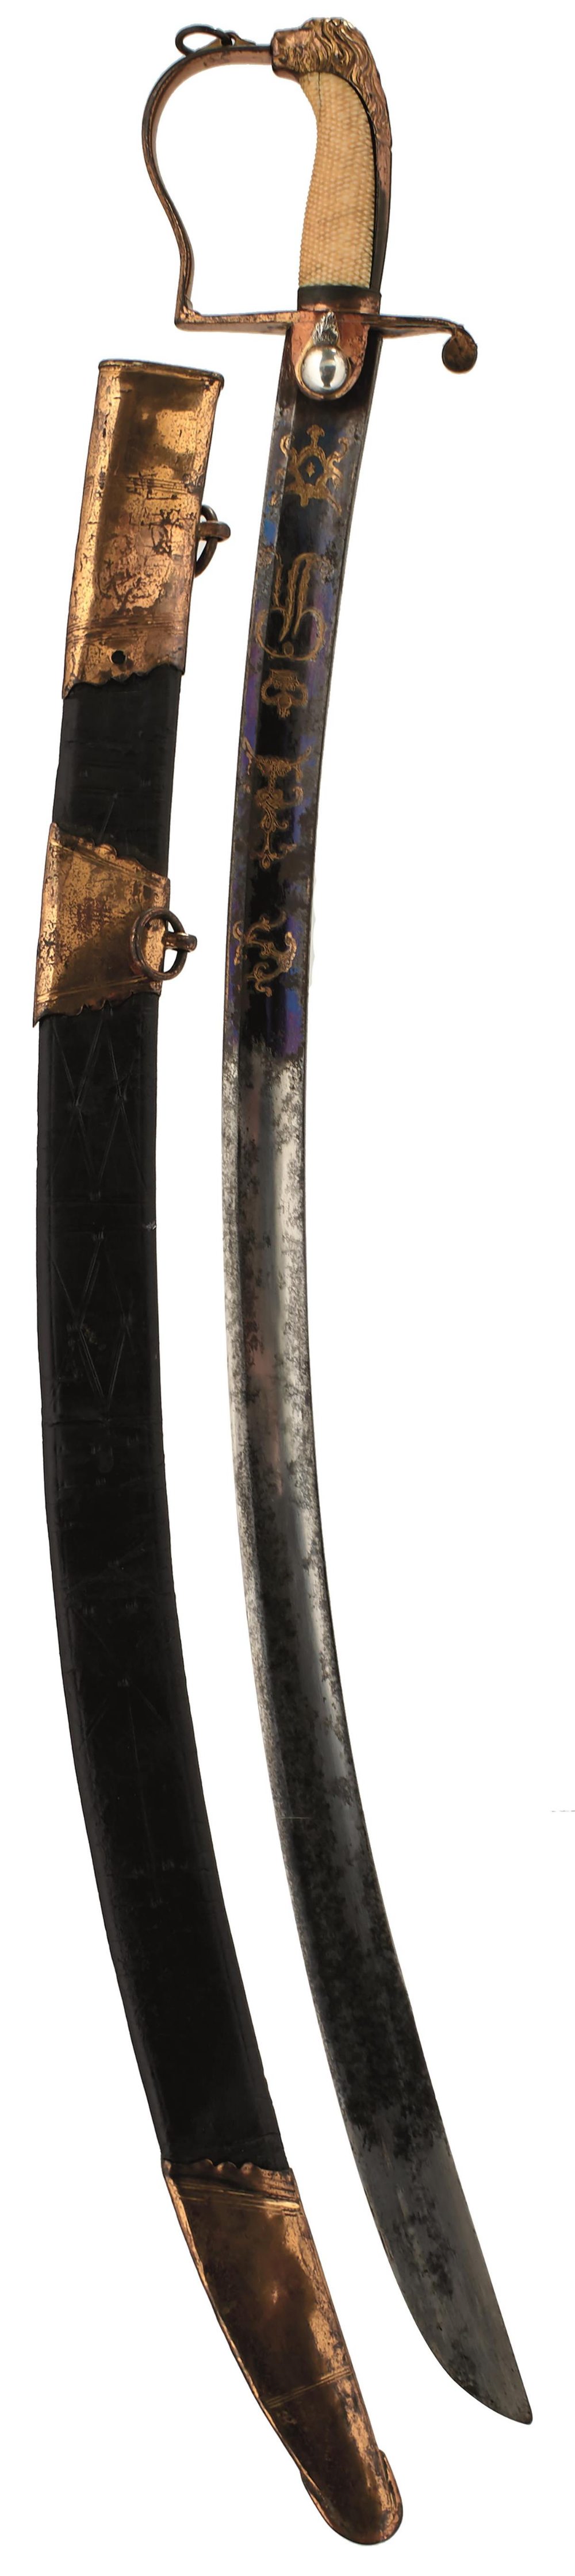 A GEORGIAN GRENADIER GUARDS OFFICER'S SWORD, 82.5cm sharply curved blade by Runkel, decorated with